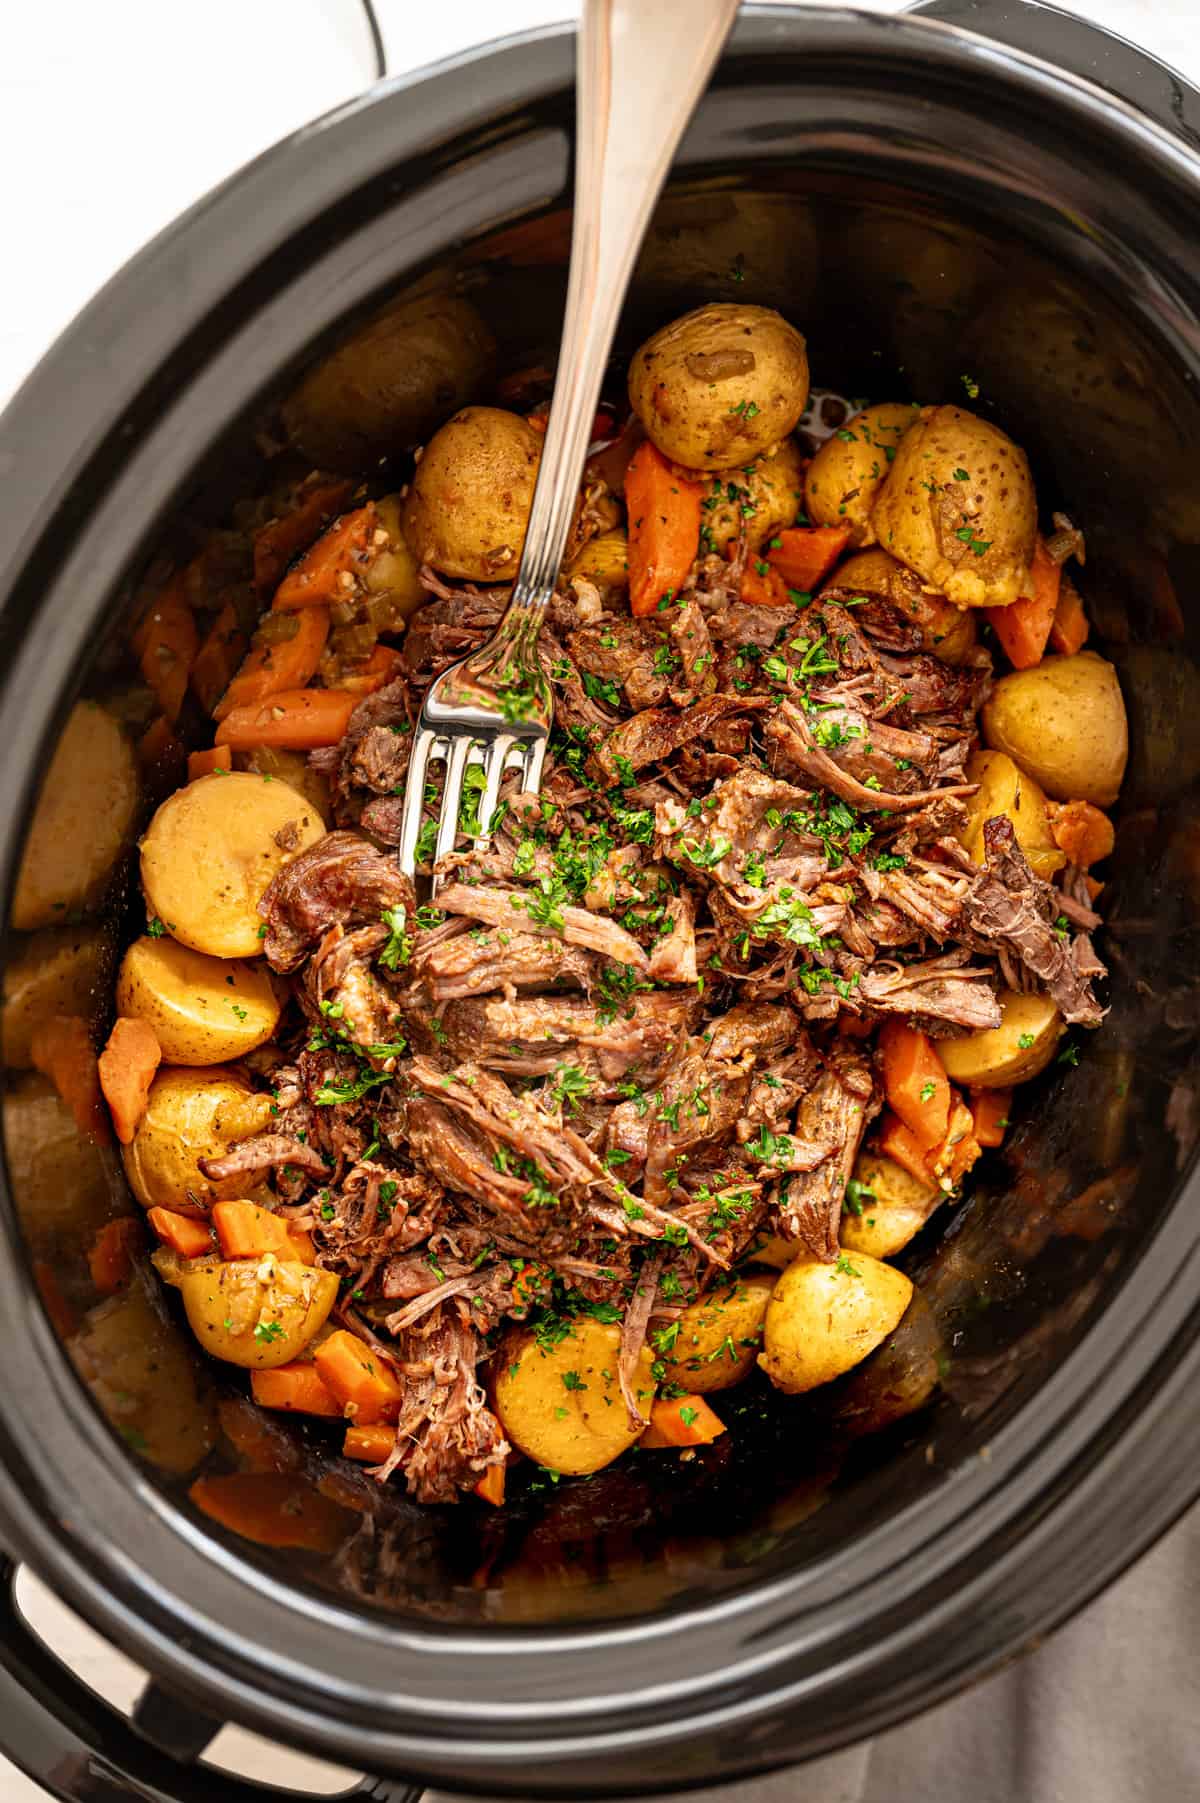 Yukon gold potatoes and carrots around the edge of a slow cooker with shredded pot roast in the middle ready to serve.